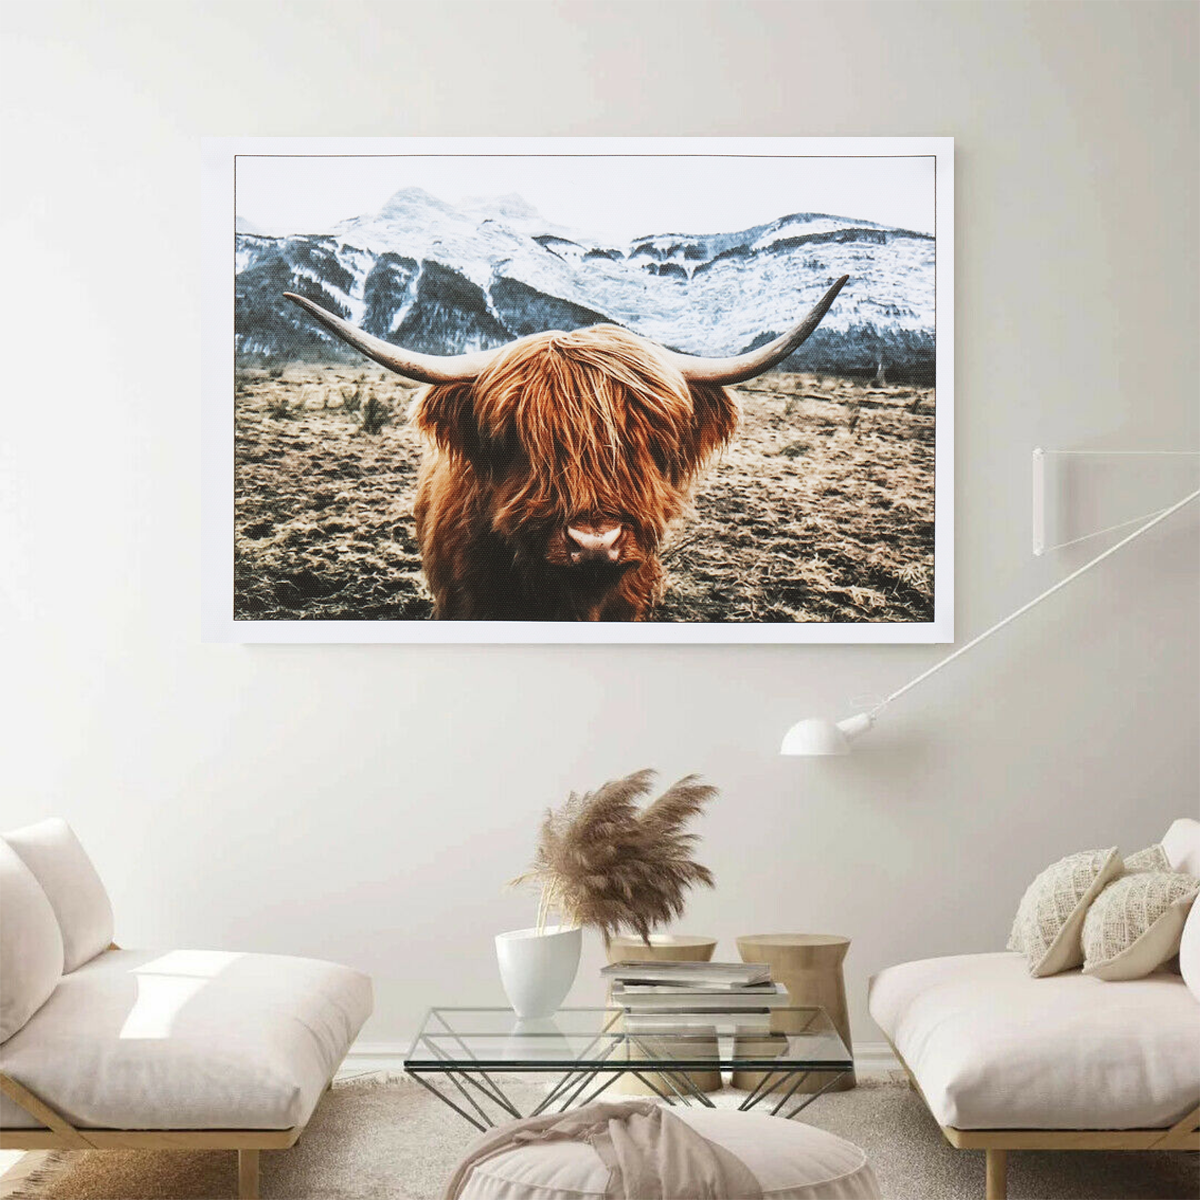 1-Piece-Canvas-Print-Painting-Highland-Cow-Poster-Wall-Decorative-Printing-Art-Pictures-Frameless-Wa-1743443-6